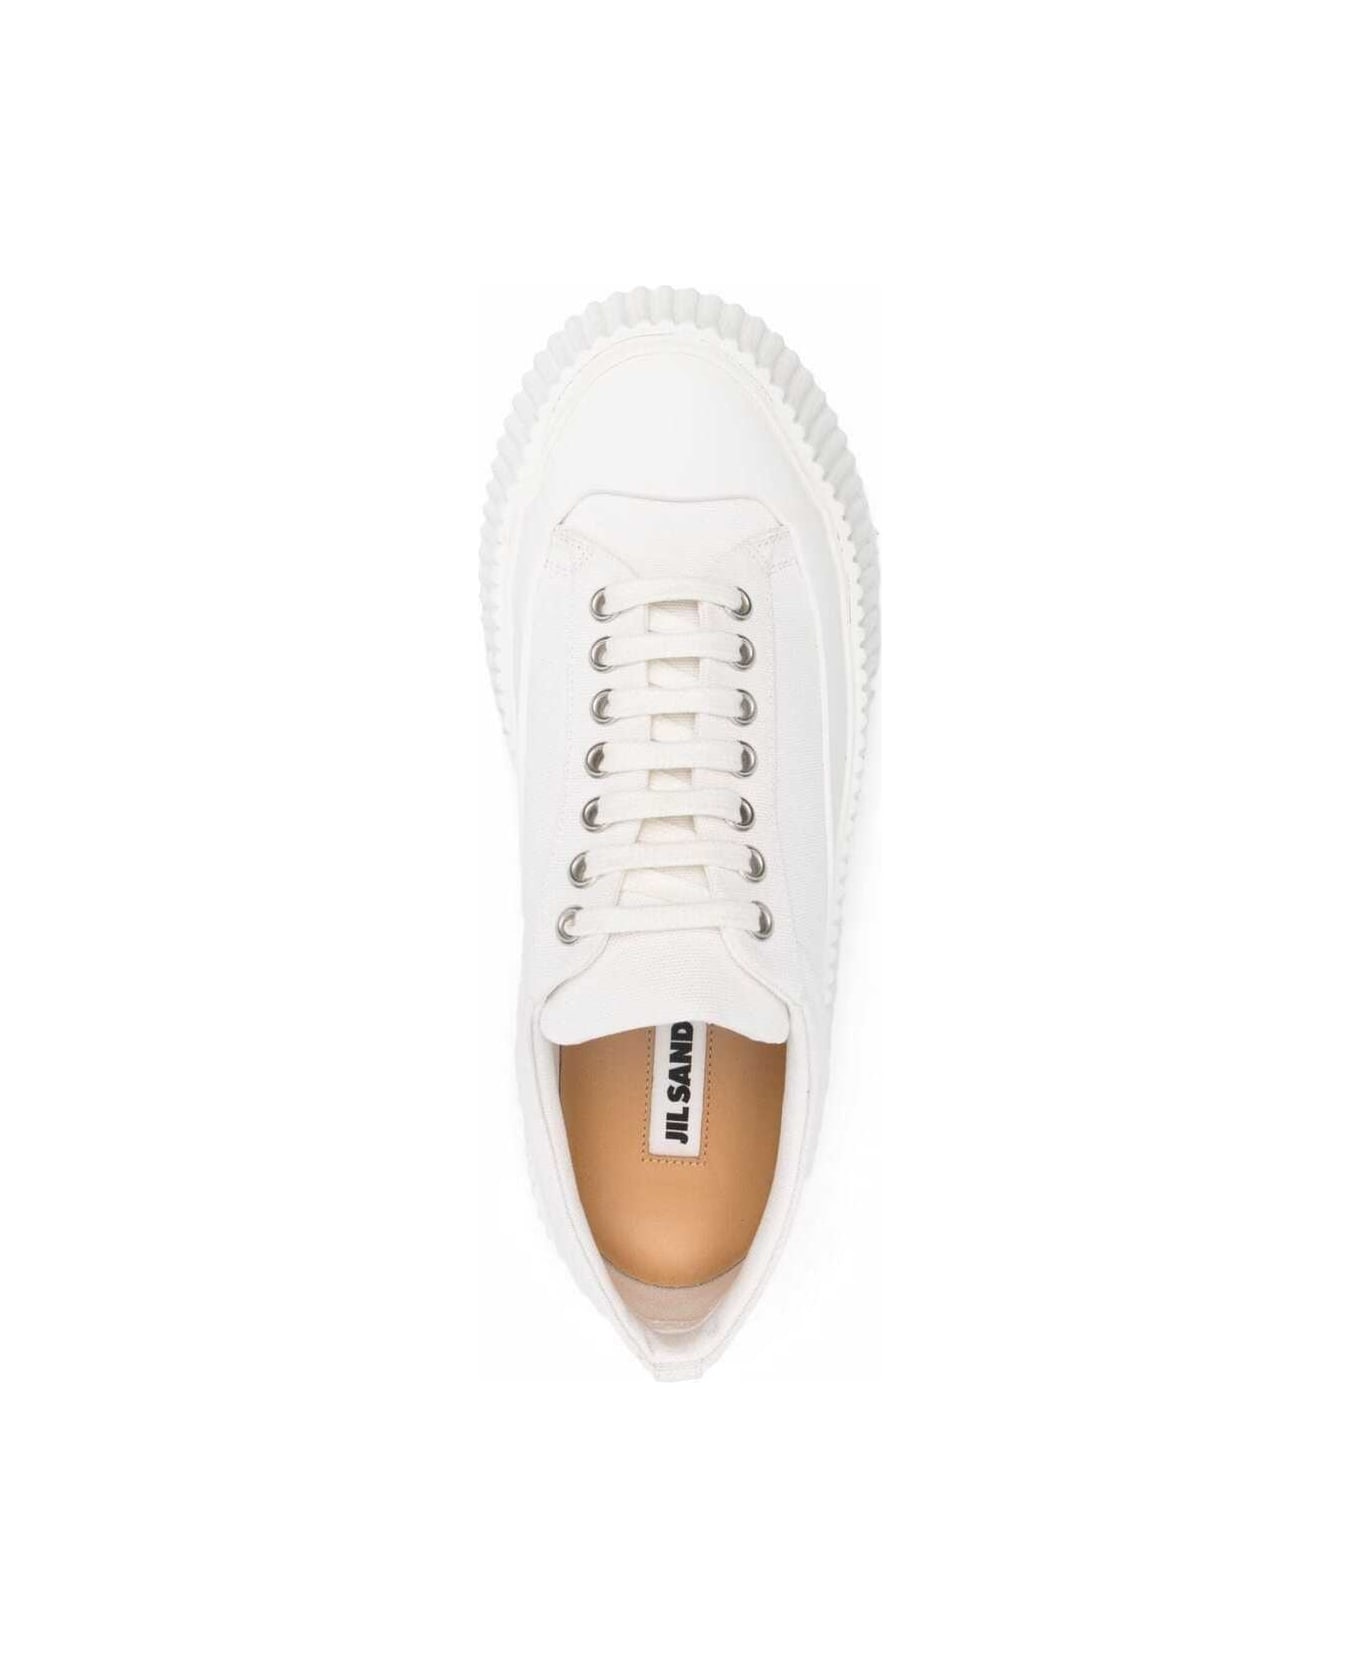 Jil Sander Woman's White Recycled Cotton Sneakers - White ウェッジシューズ